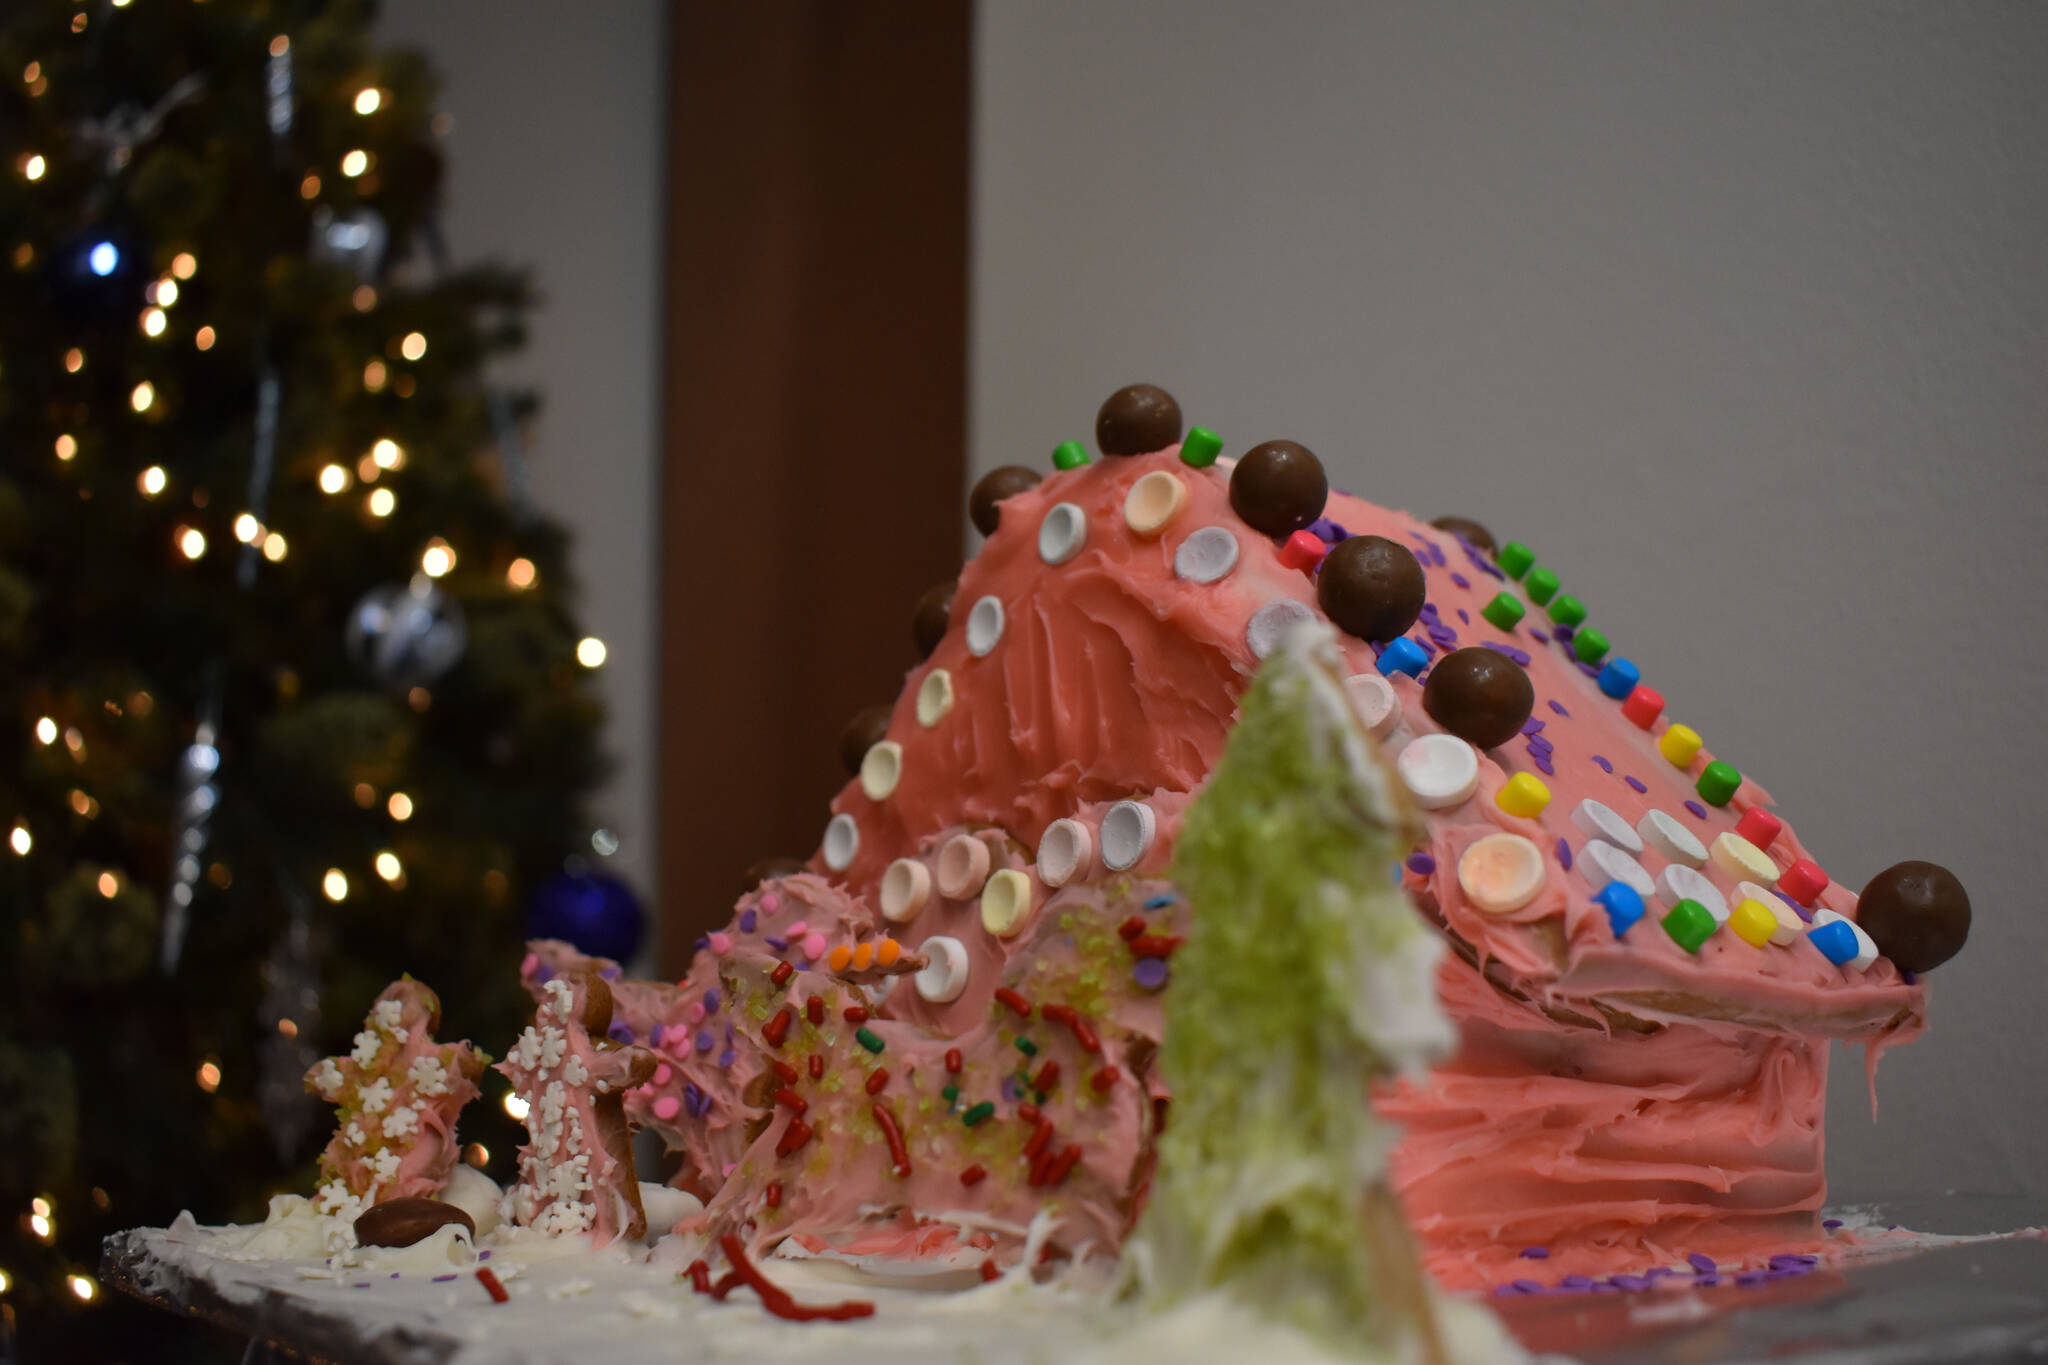 A gingerbread house designed by Ivy Franklin is seen at the Kenai Chamber of Commerce and Visitor Center on Tuesday, Dec. 6, 2022. (Jake Dye/Peninsula Clarion)